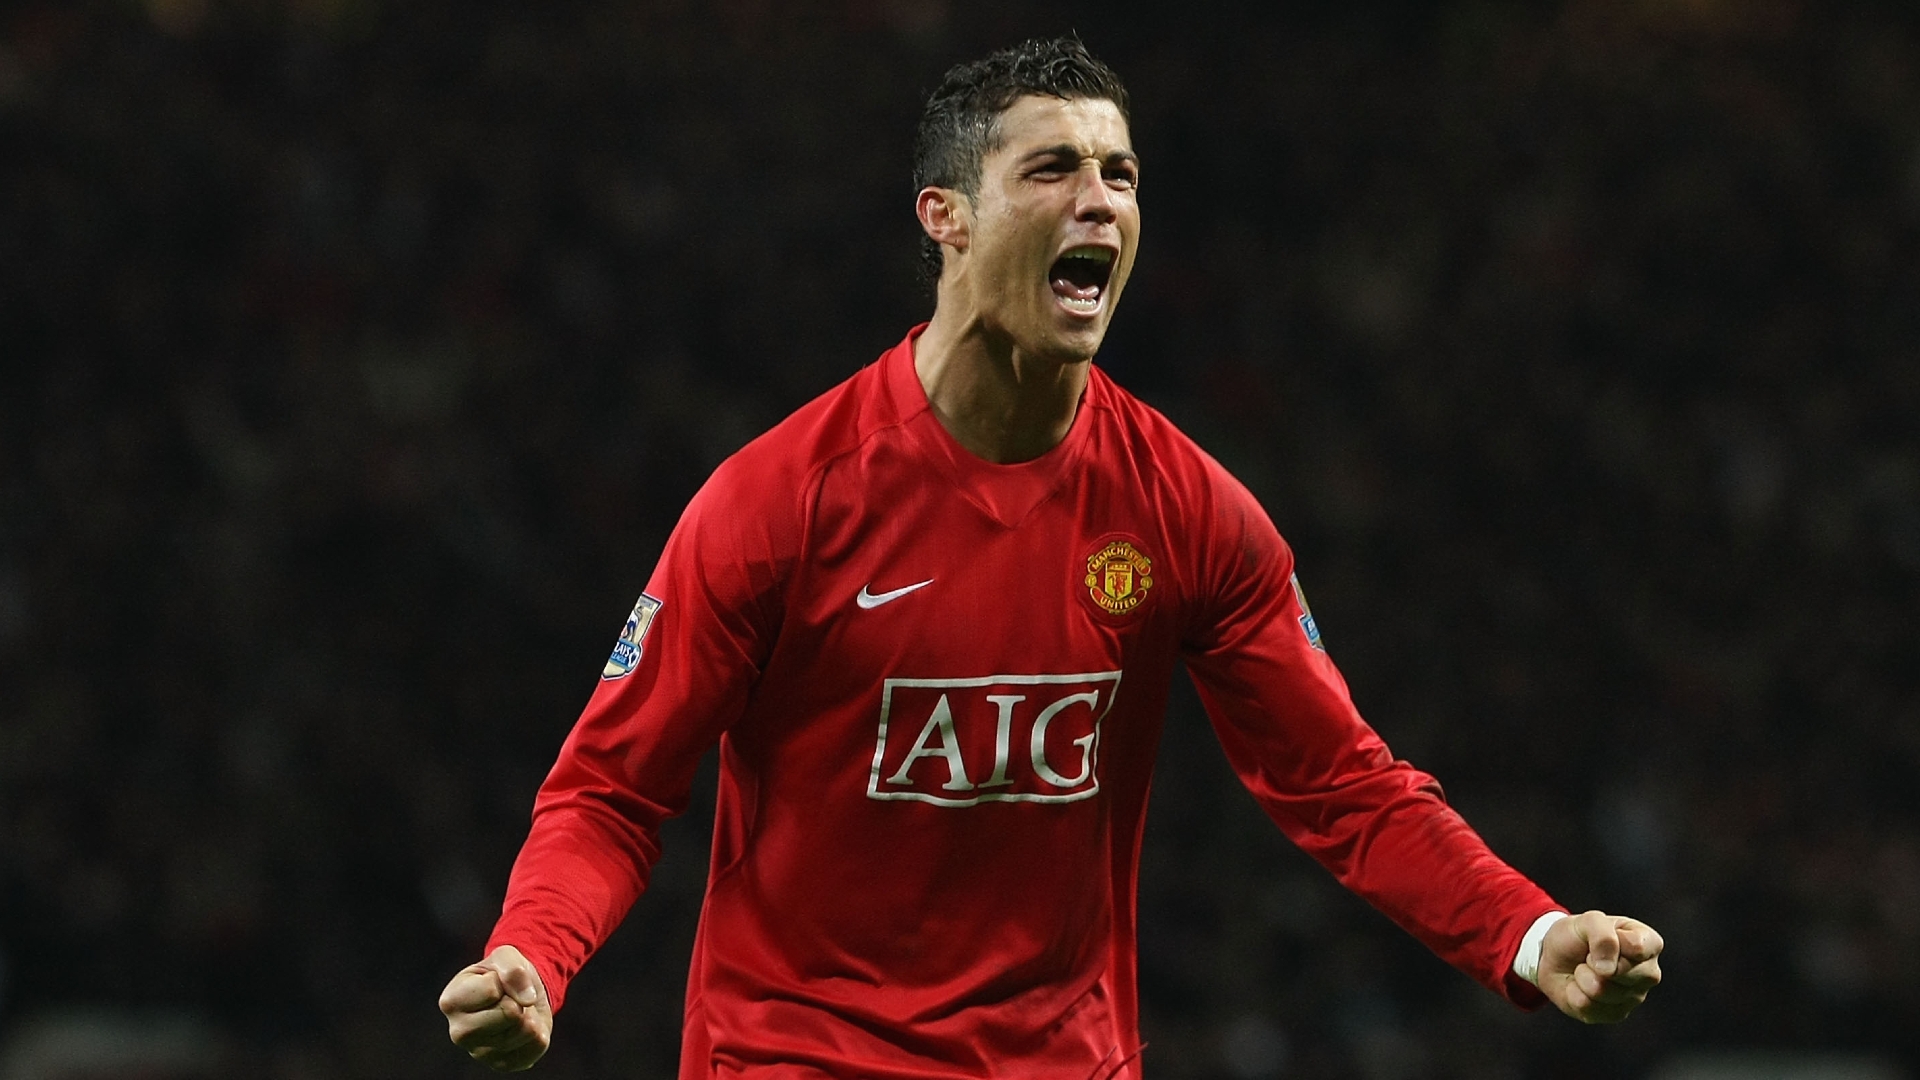 Ronaldo to Manchester United: All the key details